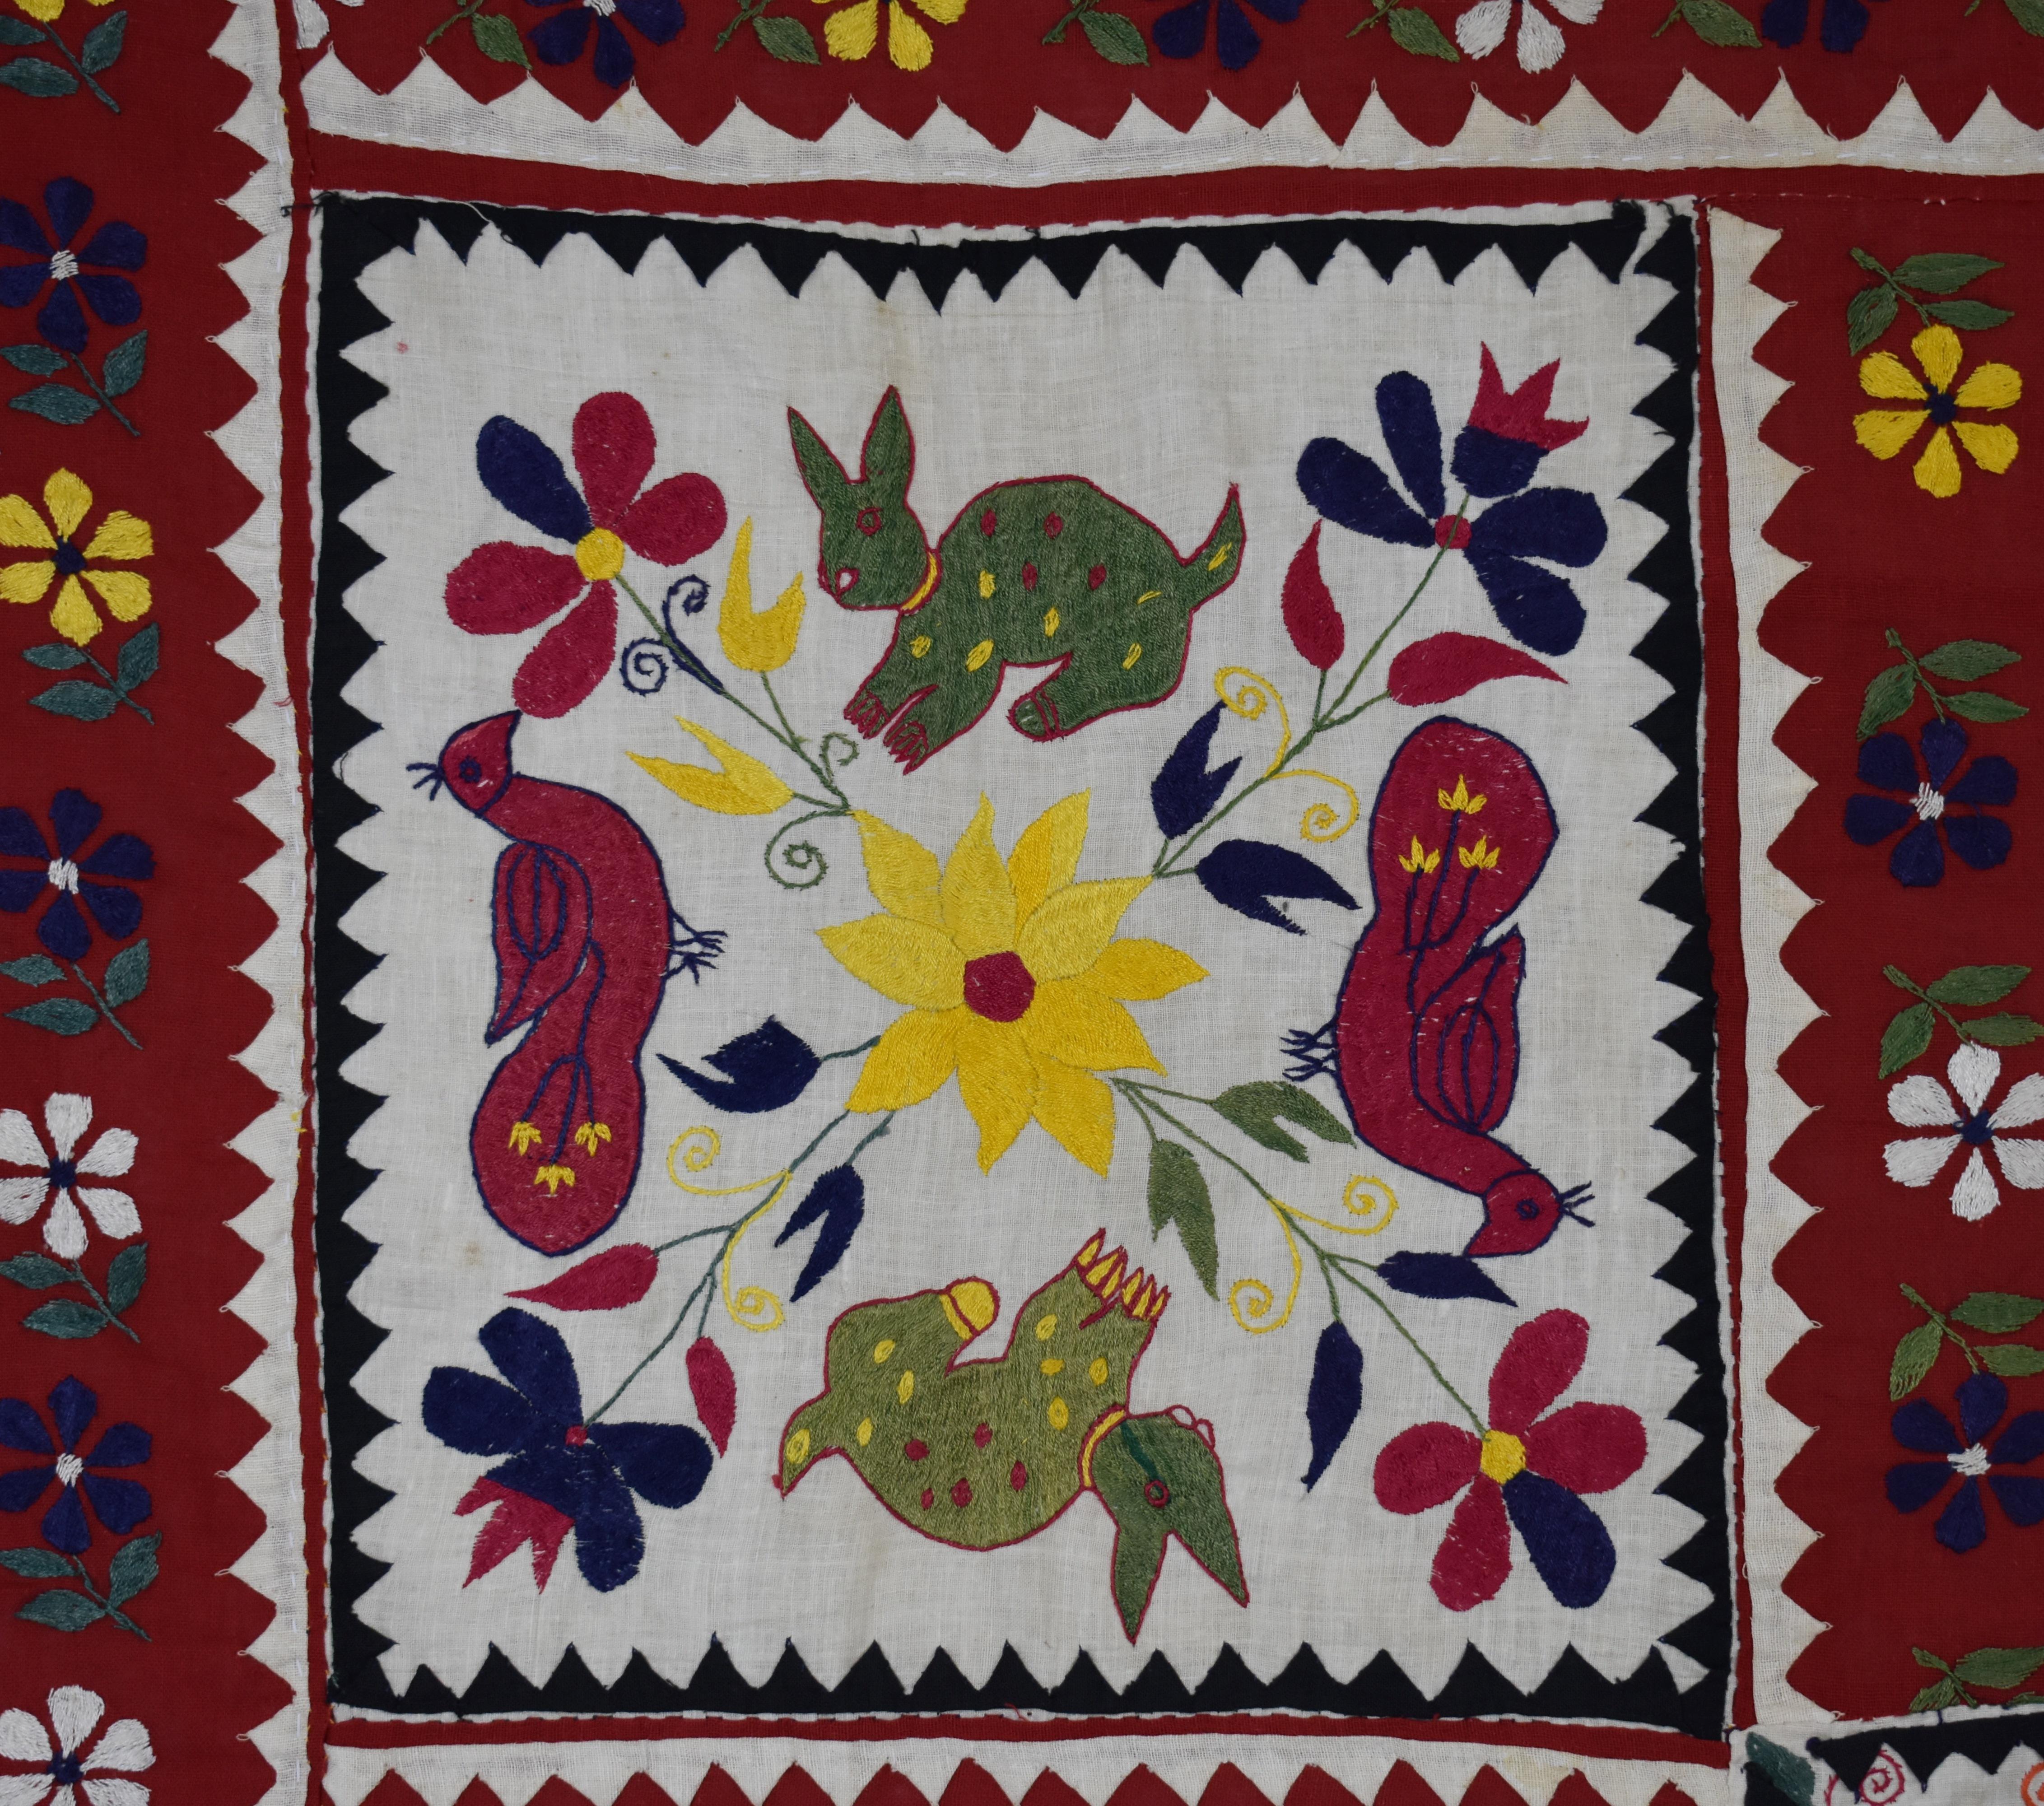 Birds ,flowers and rabbits sweetly embroidered surrounded by an applique border
in this bright and cheerful Vintage Cotton Indian Bedspread.

Gujarat circa 1960.